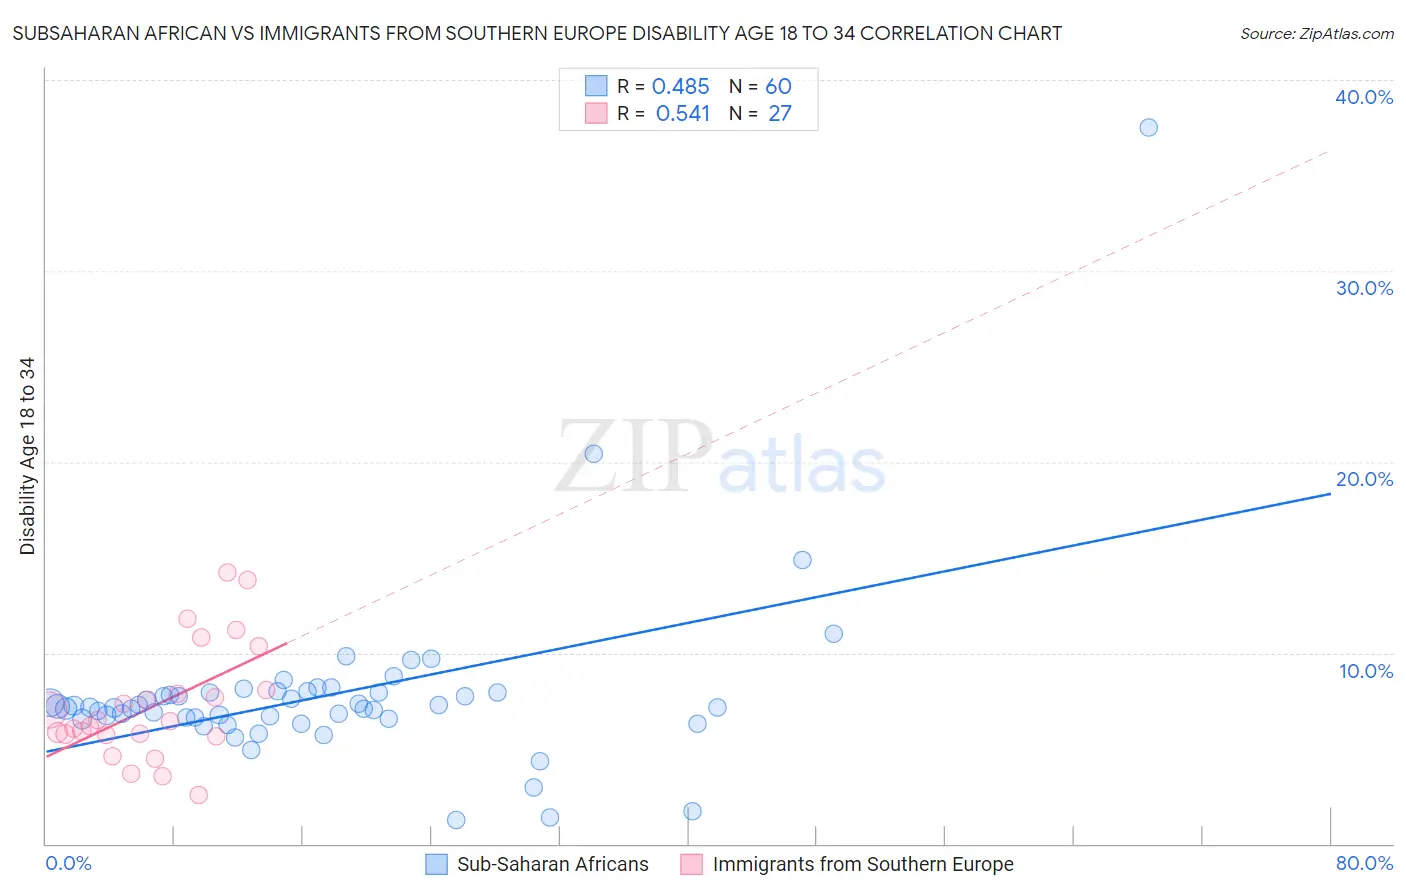 Subsaharan African vs Immigrants from Southern Europe Disability Age 18 to 34